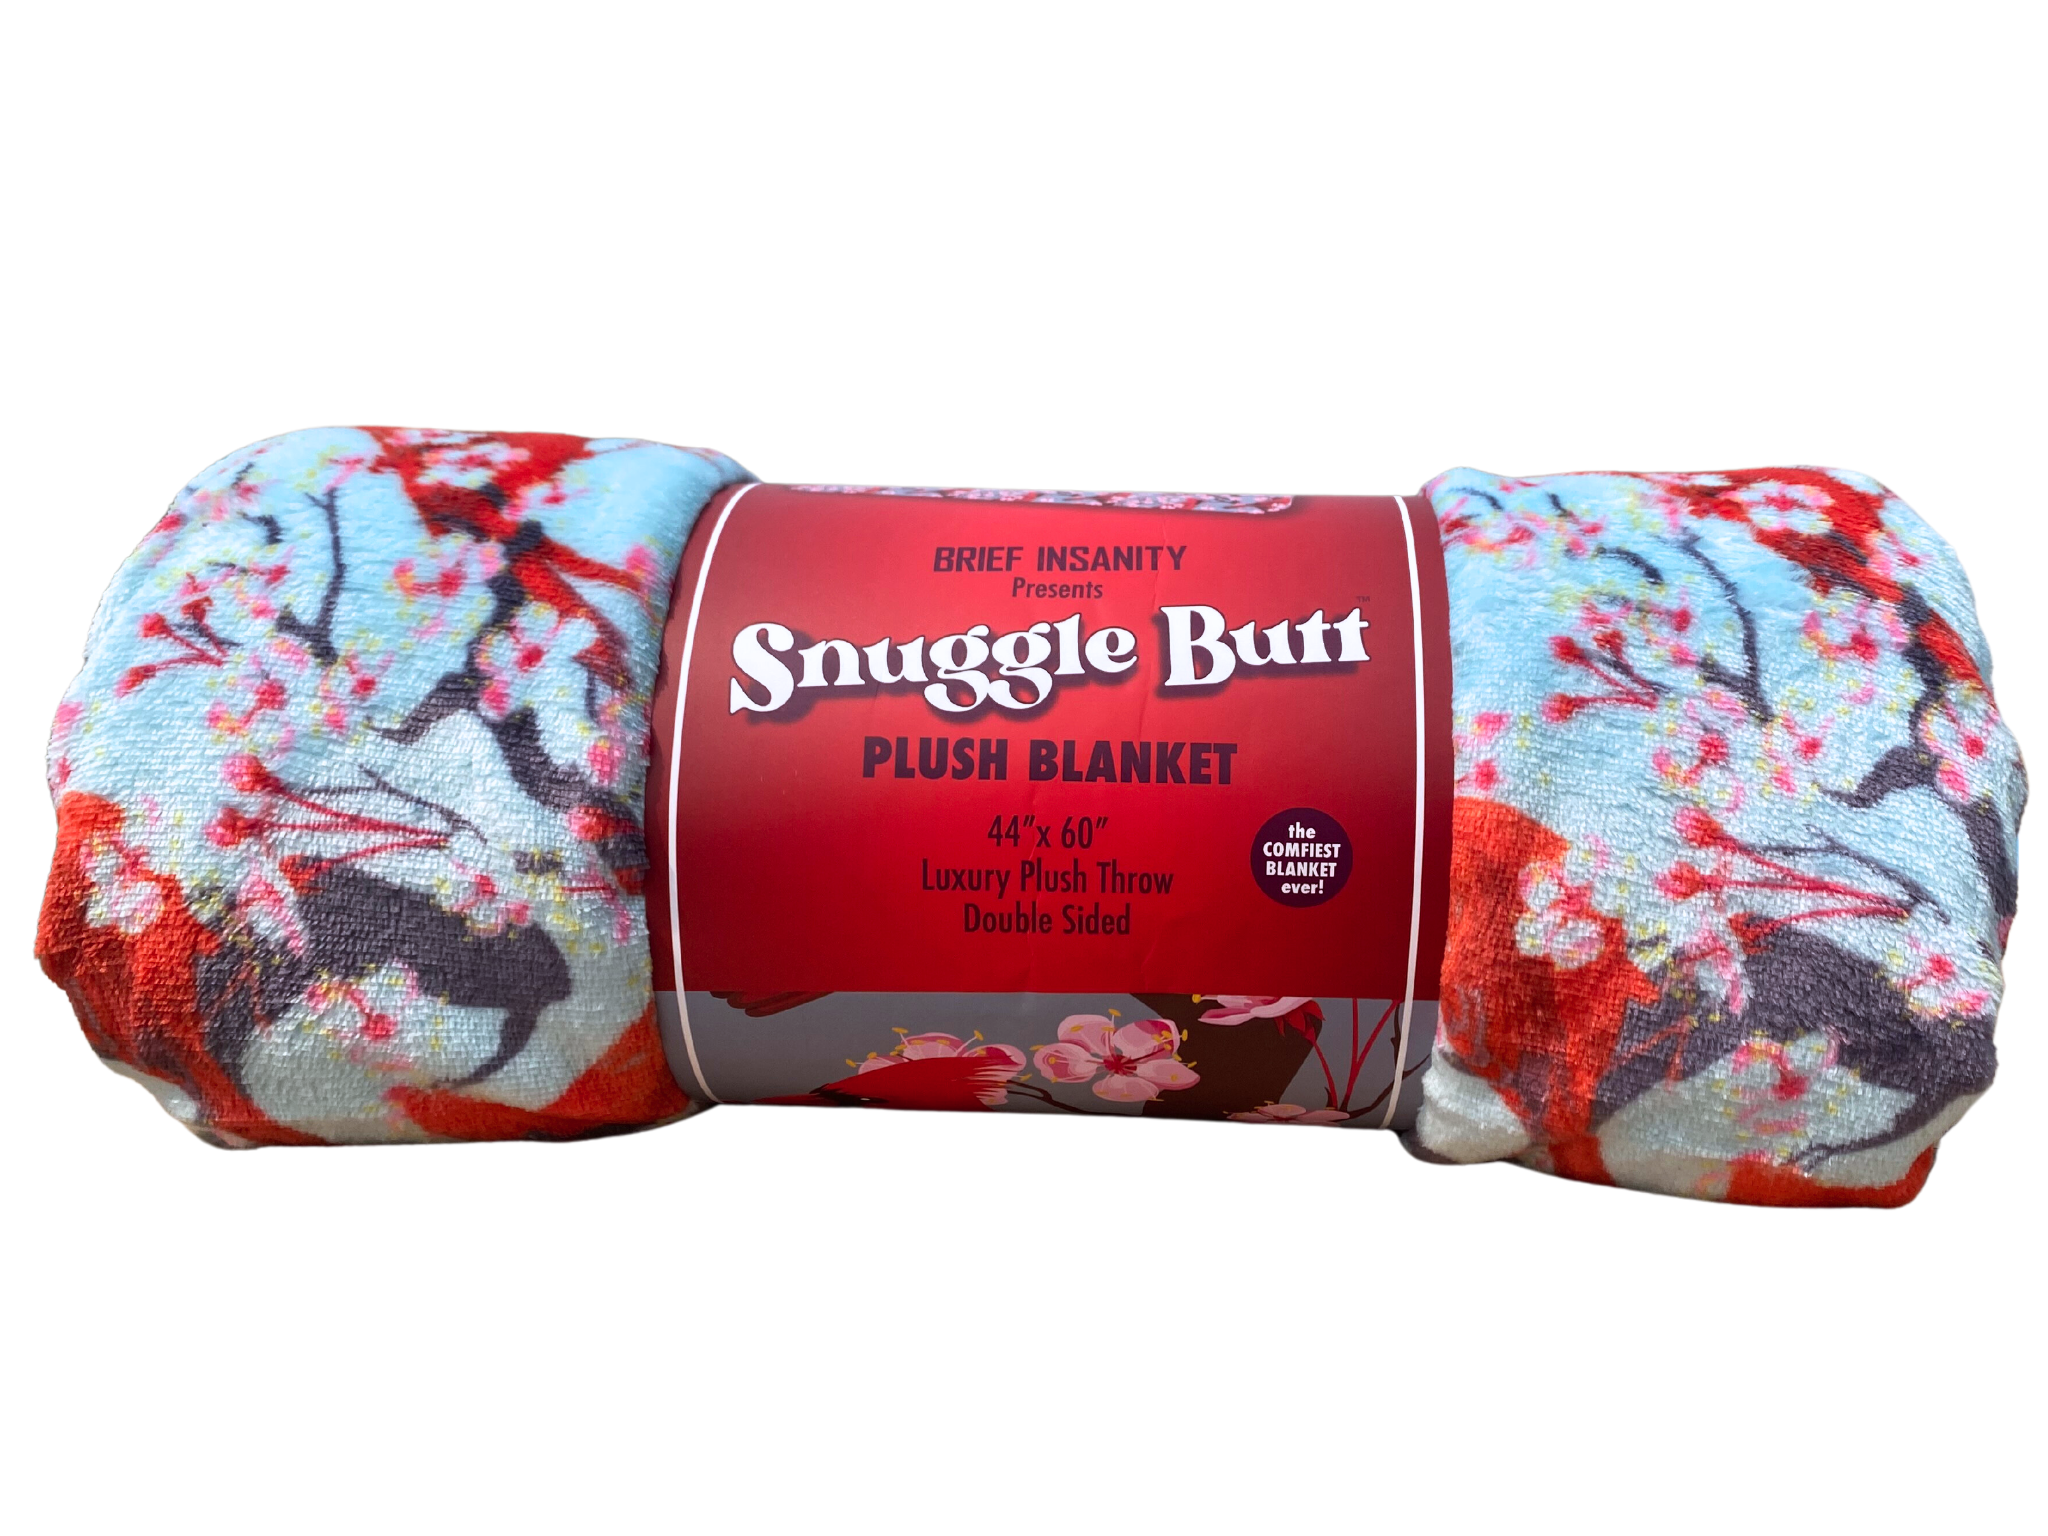 BRIEF INSANITY Snuggle Butt Cardinal Floral Plush Throw Blanket Rolled